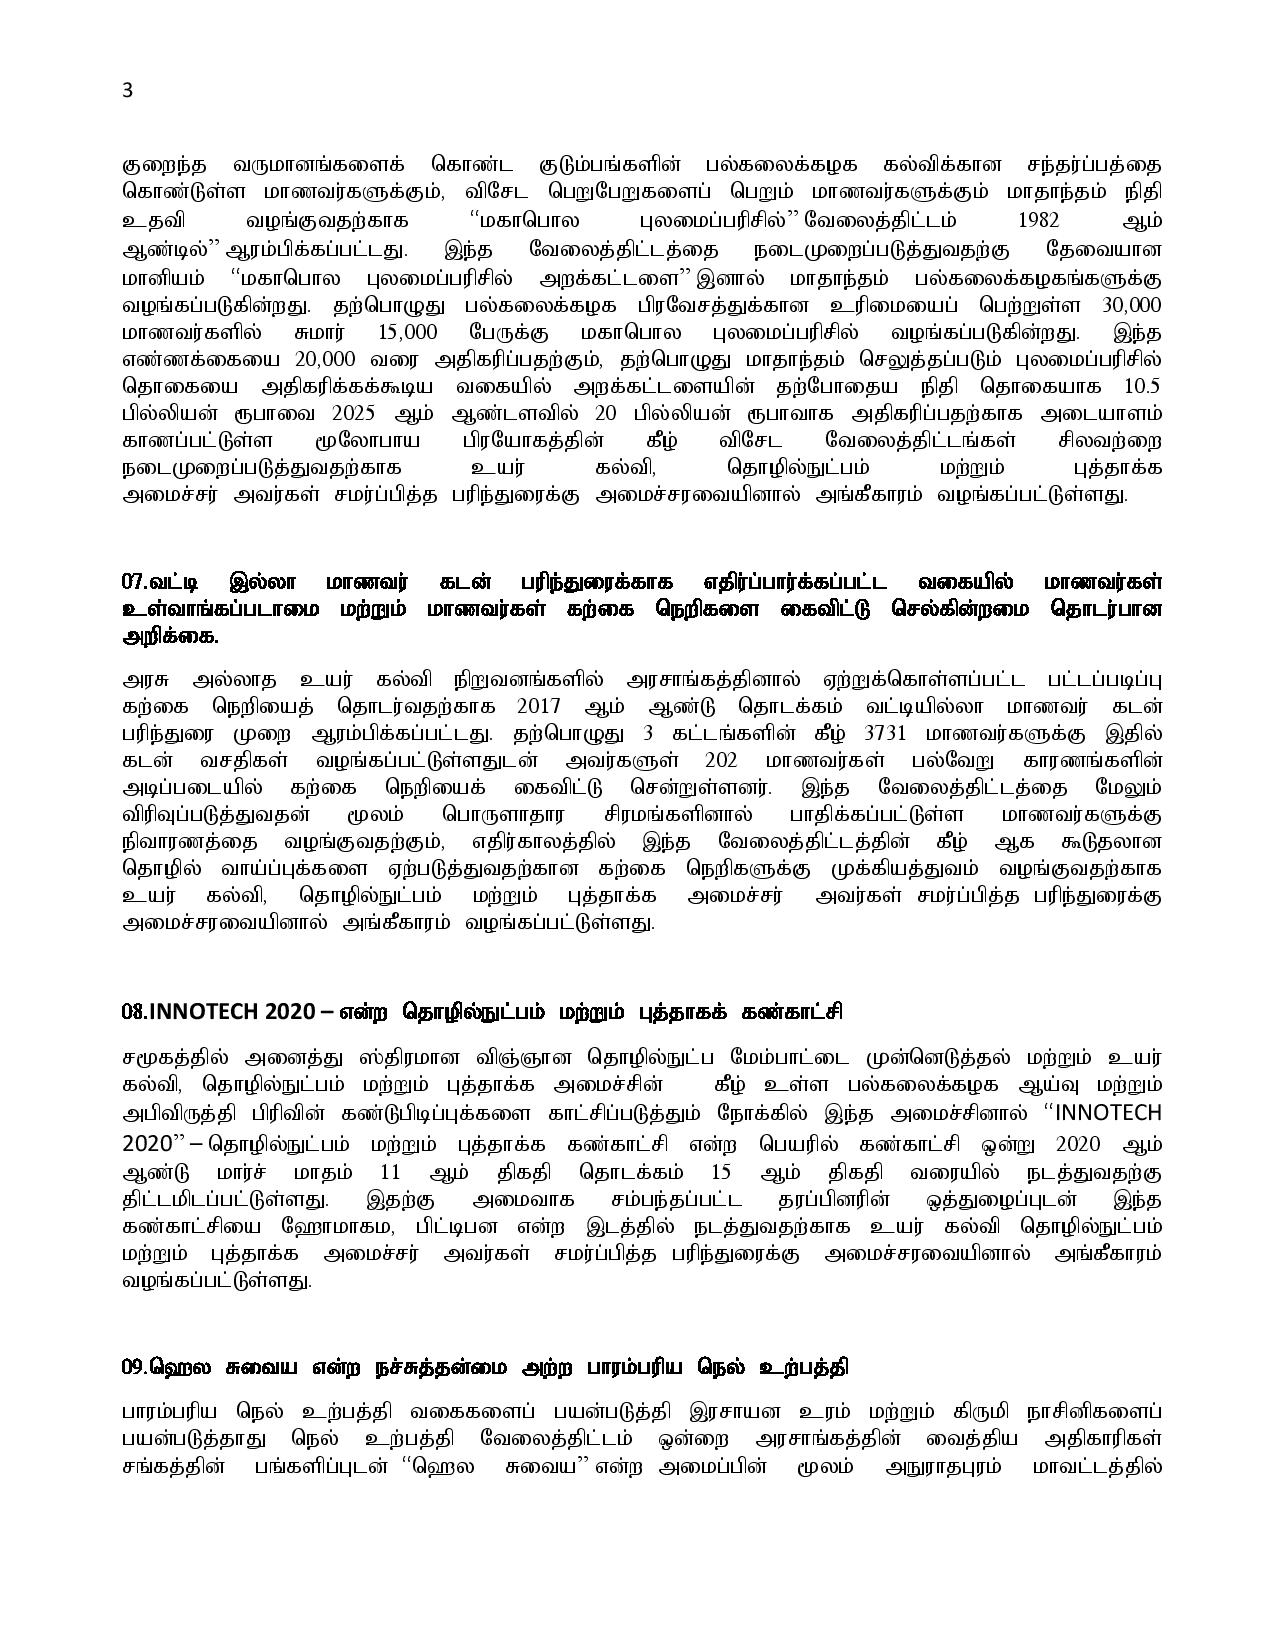 2020.02.27 cabinet tamil page 003